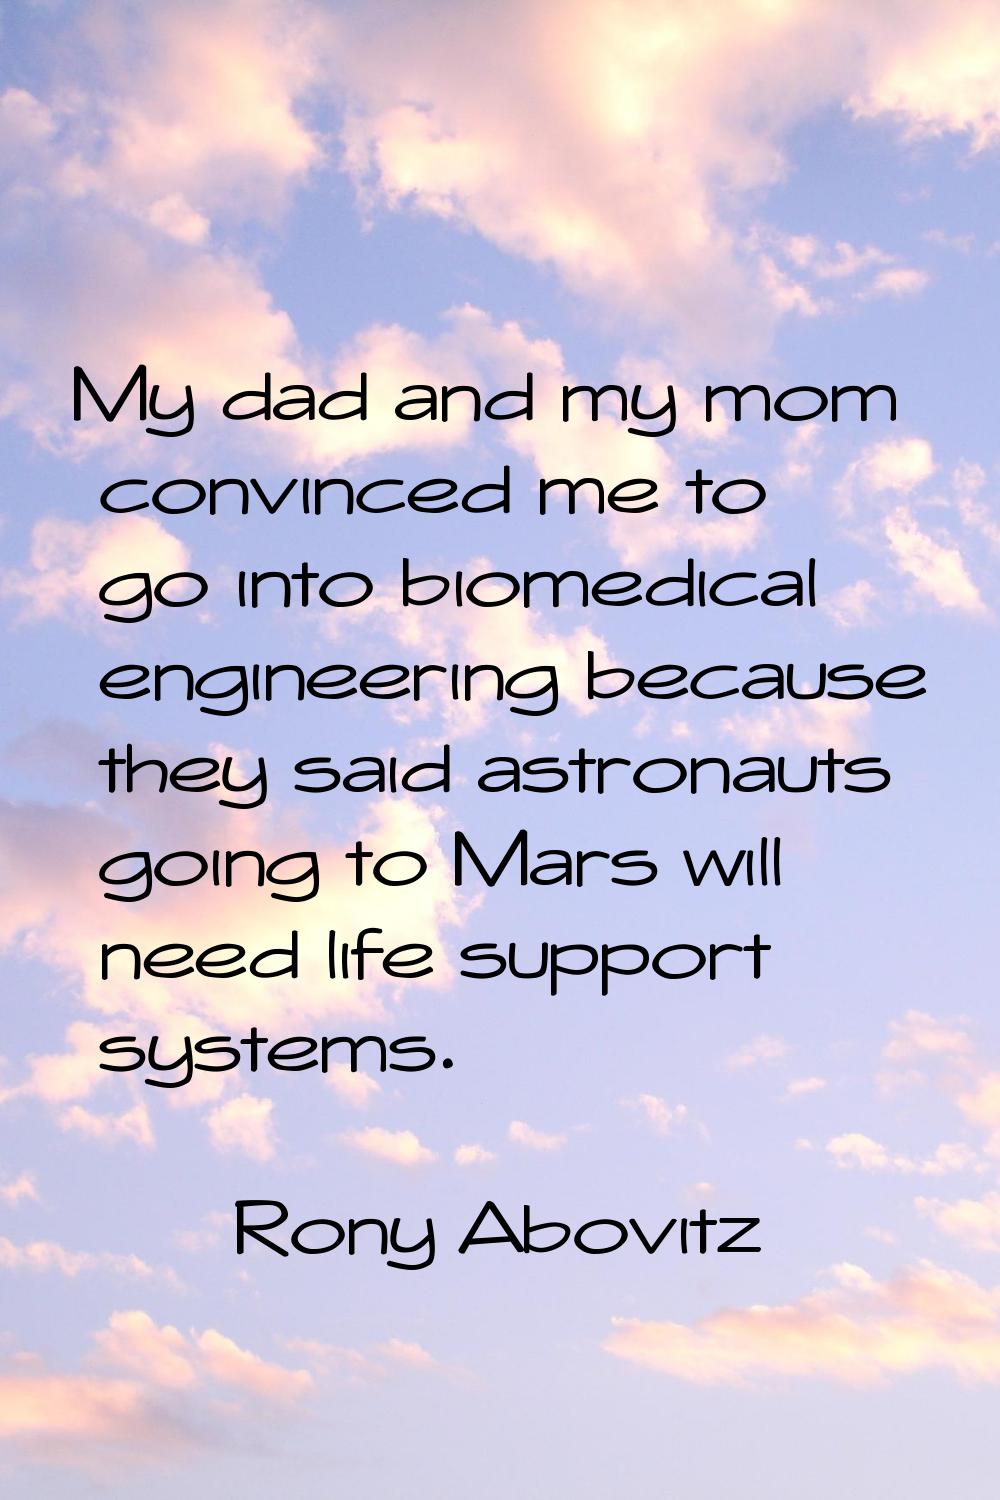 My dad and my mom convinced me to go into biomedical engineering because they said astronauts going